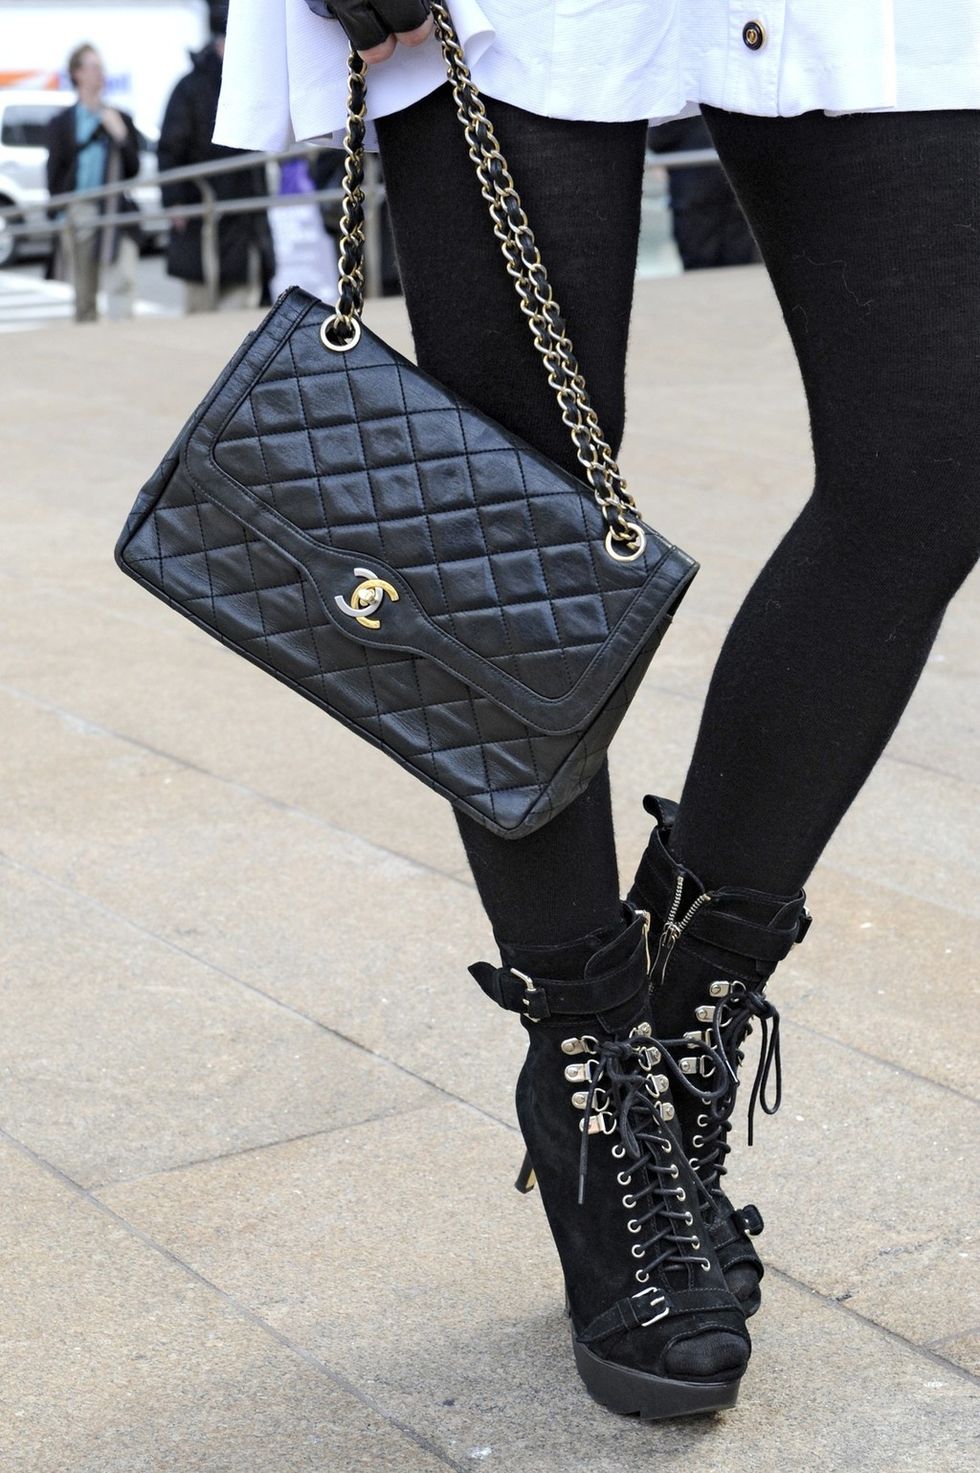 Joint, White, Bag, Style, Street fashion, Boot, Fashion accessory, Fashion, Black, Luggage and bags, 